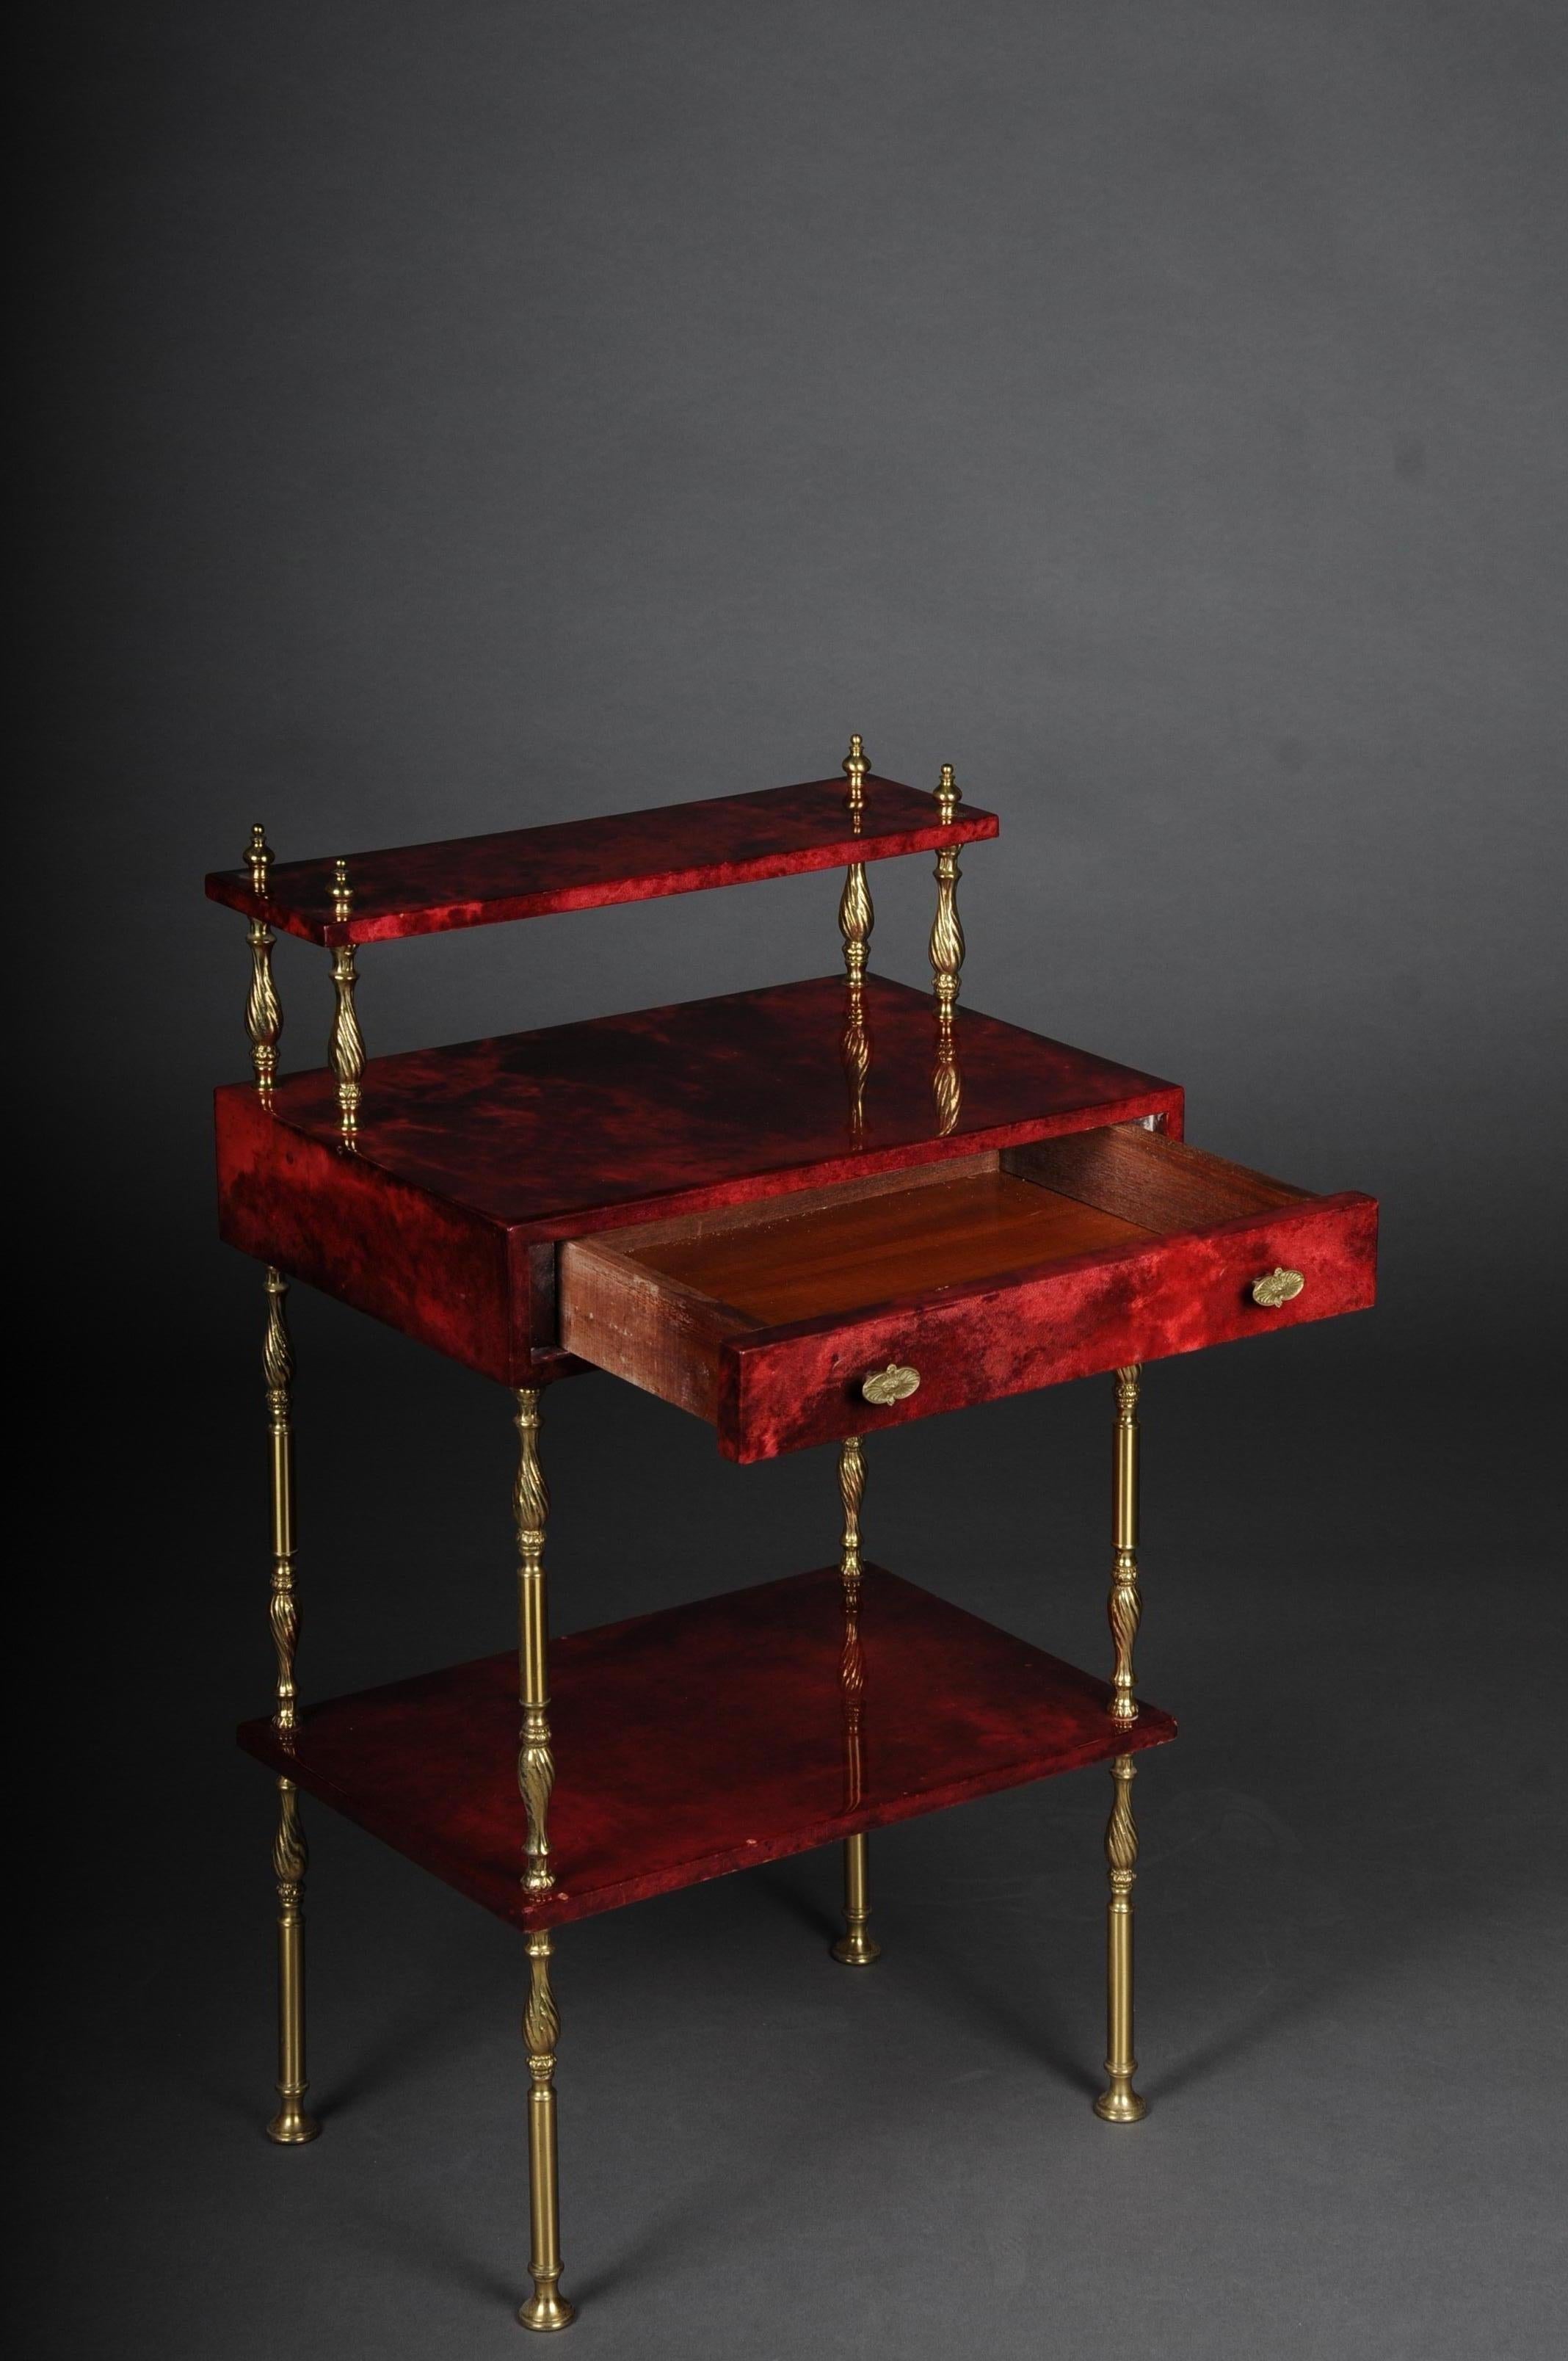 Brass Exclusive Italian Vintage Side Table, Aldo Tura, Red, 1970s